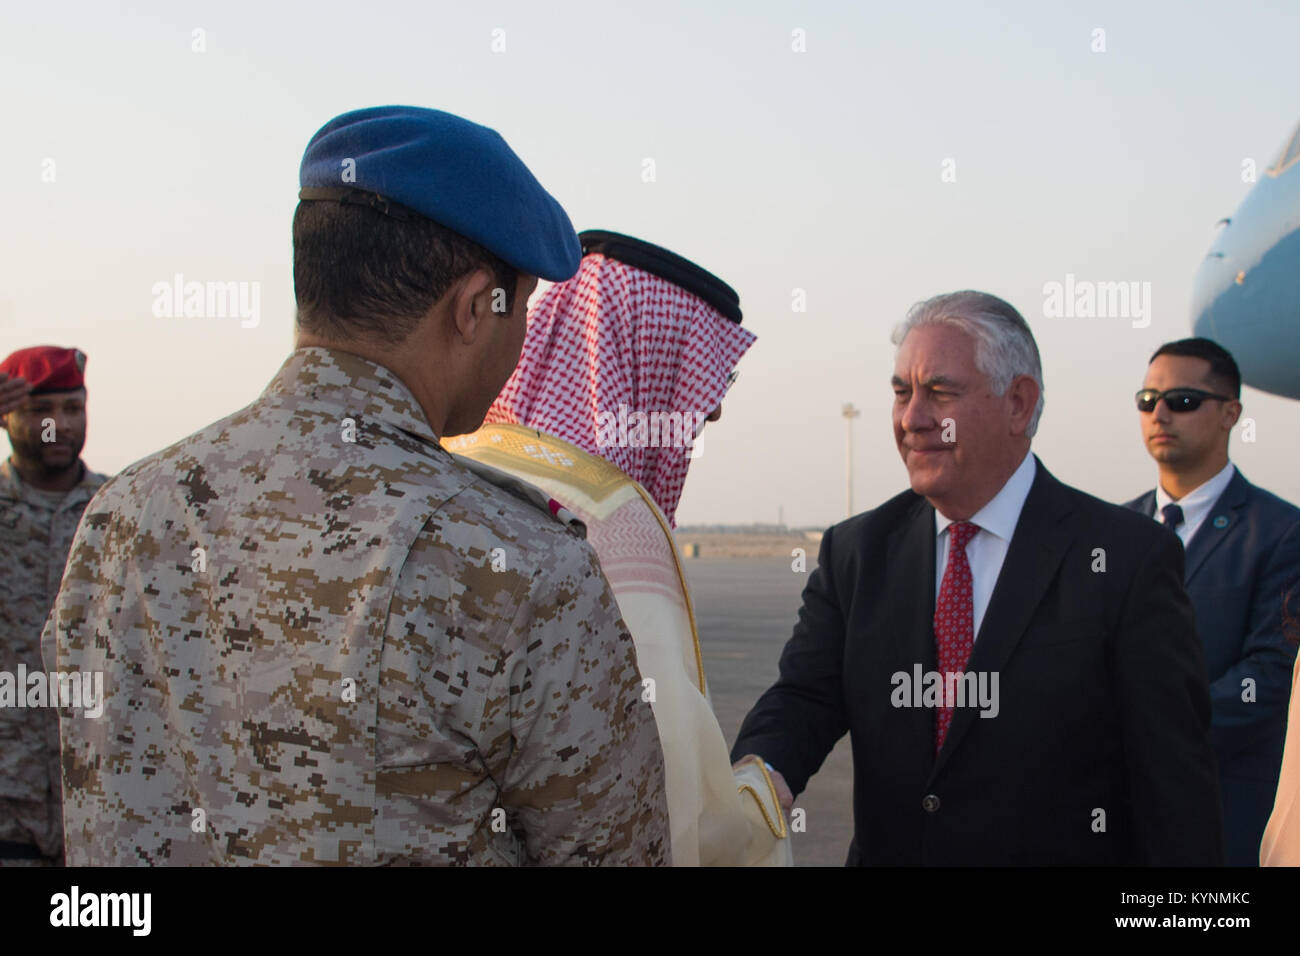 U.S. Secretary of State Rex Tillerson is Greeted by Saudi Undersecretary for the Ministry of Foreign Affairs for Protocol Affairs Azzam Al-Gain at the King Salman Air Base upon arrival in Riyadh, Saudi Arabia on October 21, 2017. Stock Photo